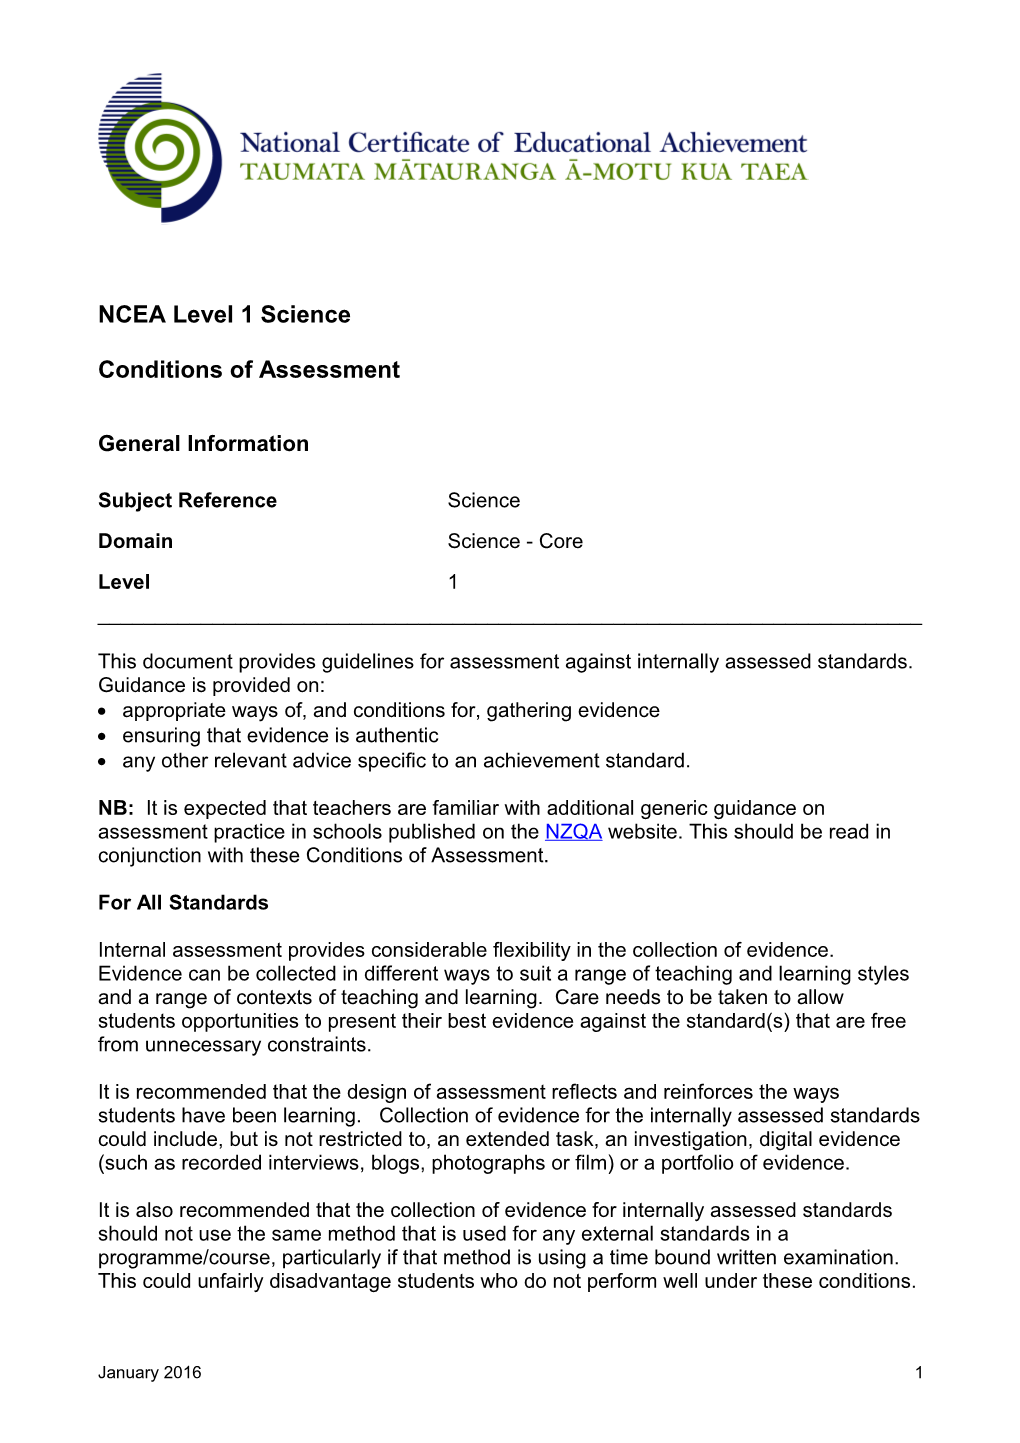 NCEA Level 1Science